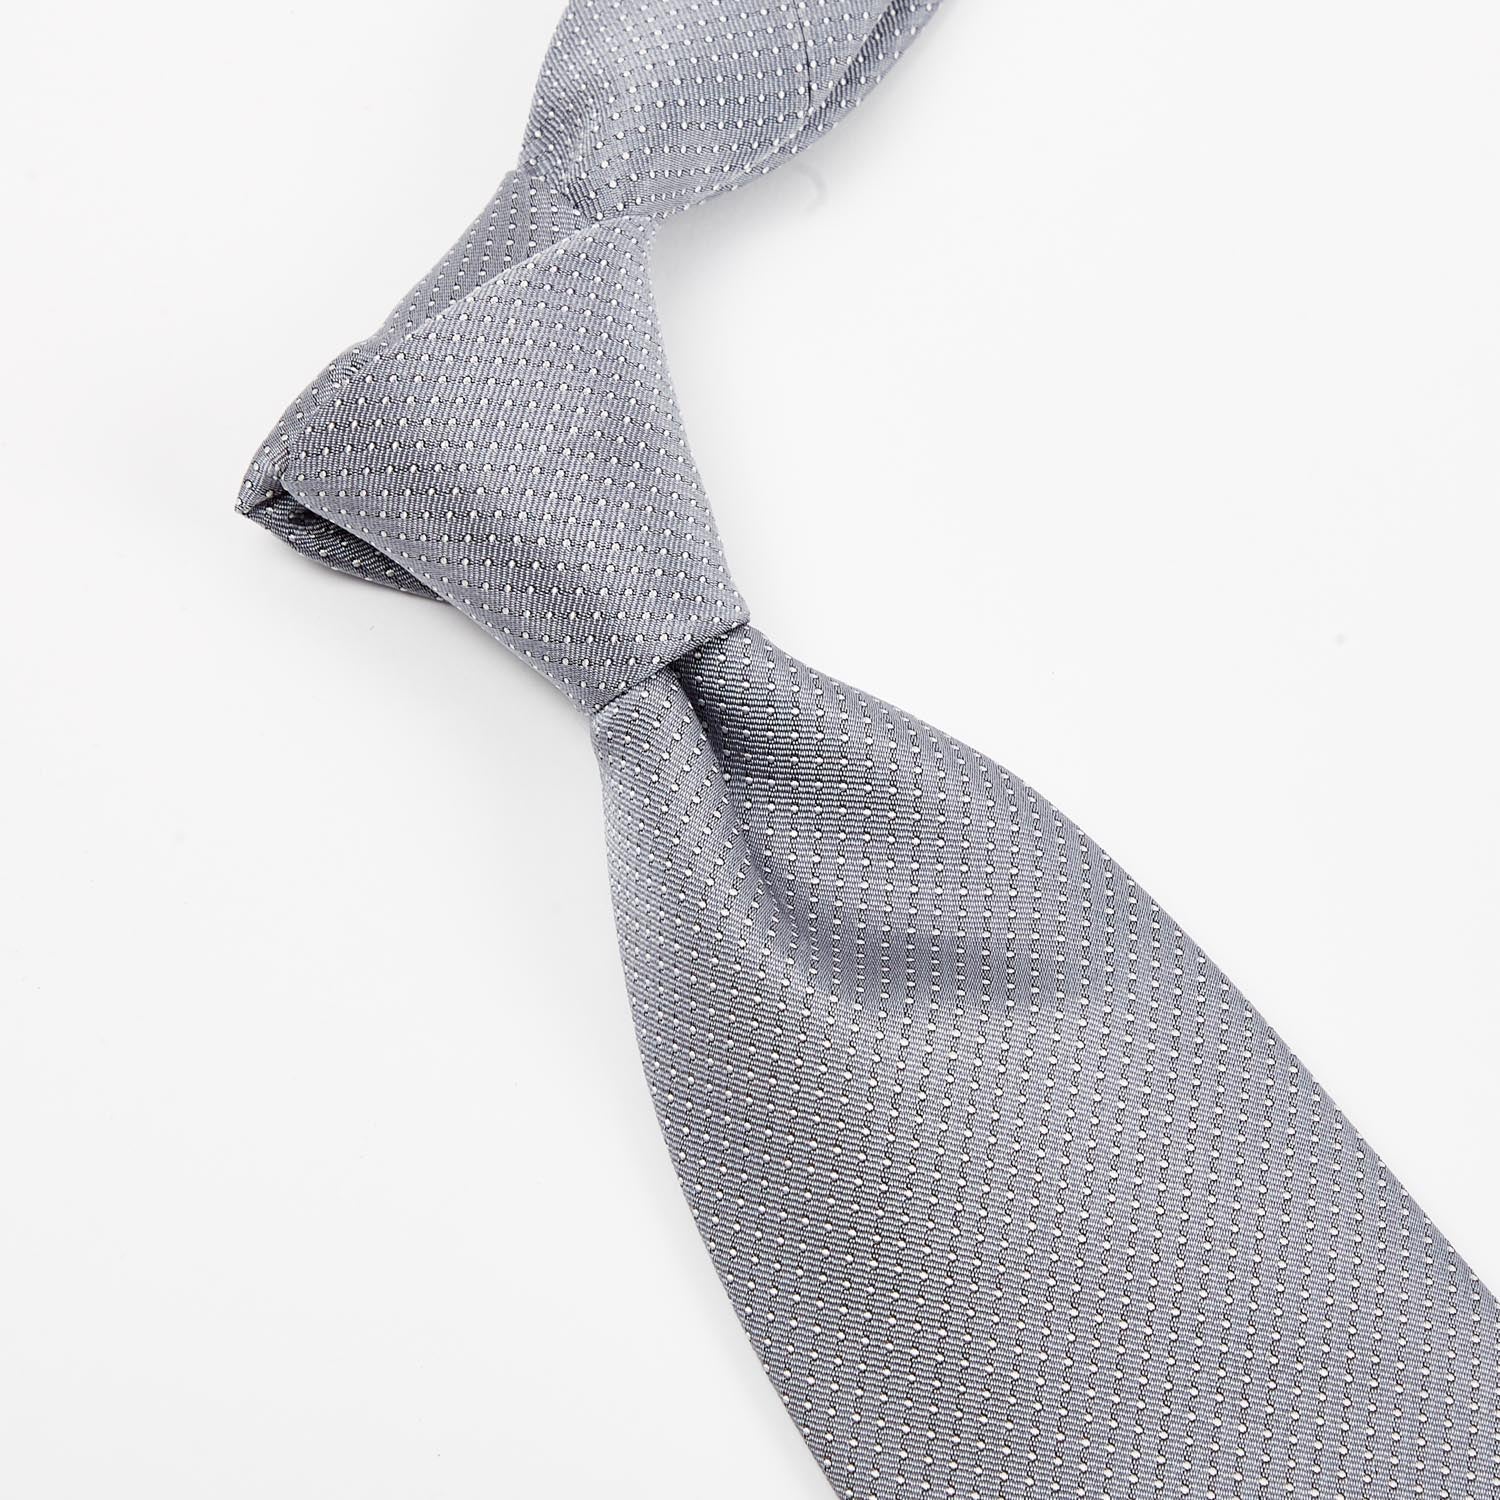 A quality Sovereign Grade Silver Silk Micro Dot Tie from KirbyAllison.com, handmade gray tie on a white background.